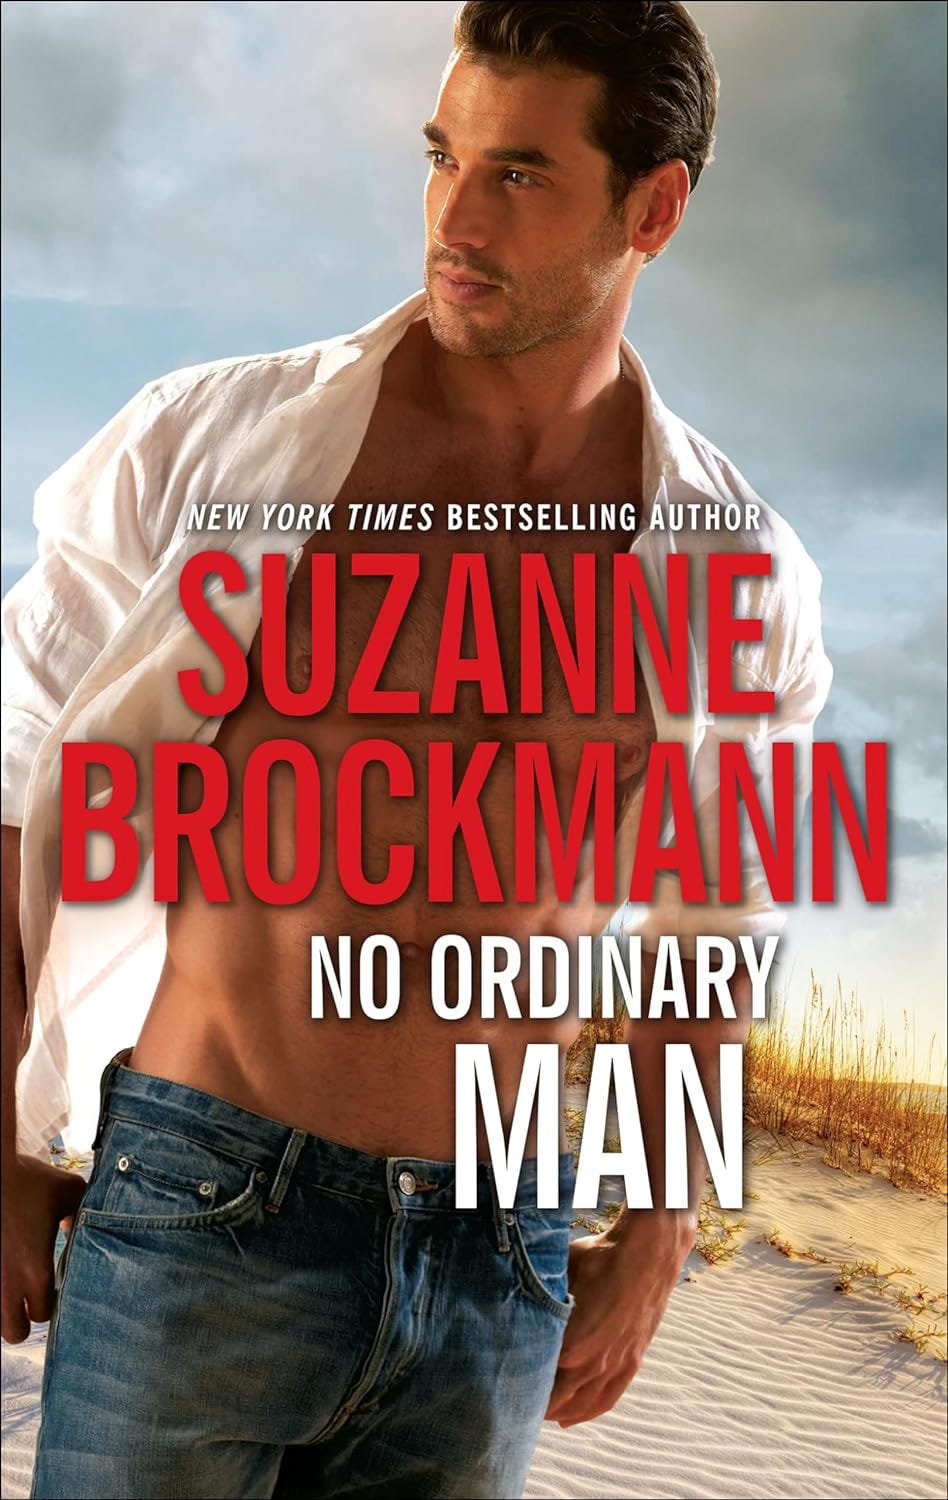 2024's cover art for Suzanne Brockmann's romantic suspense novel NO ORDINARY MAN features an attractive young man on the beach with an open shirt and jeans worn rather low on his hips.